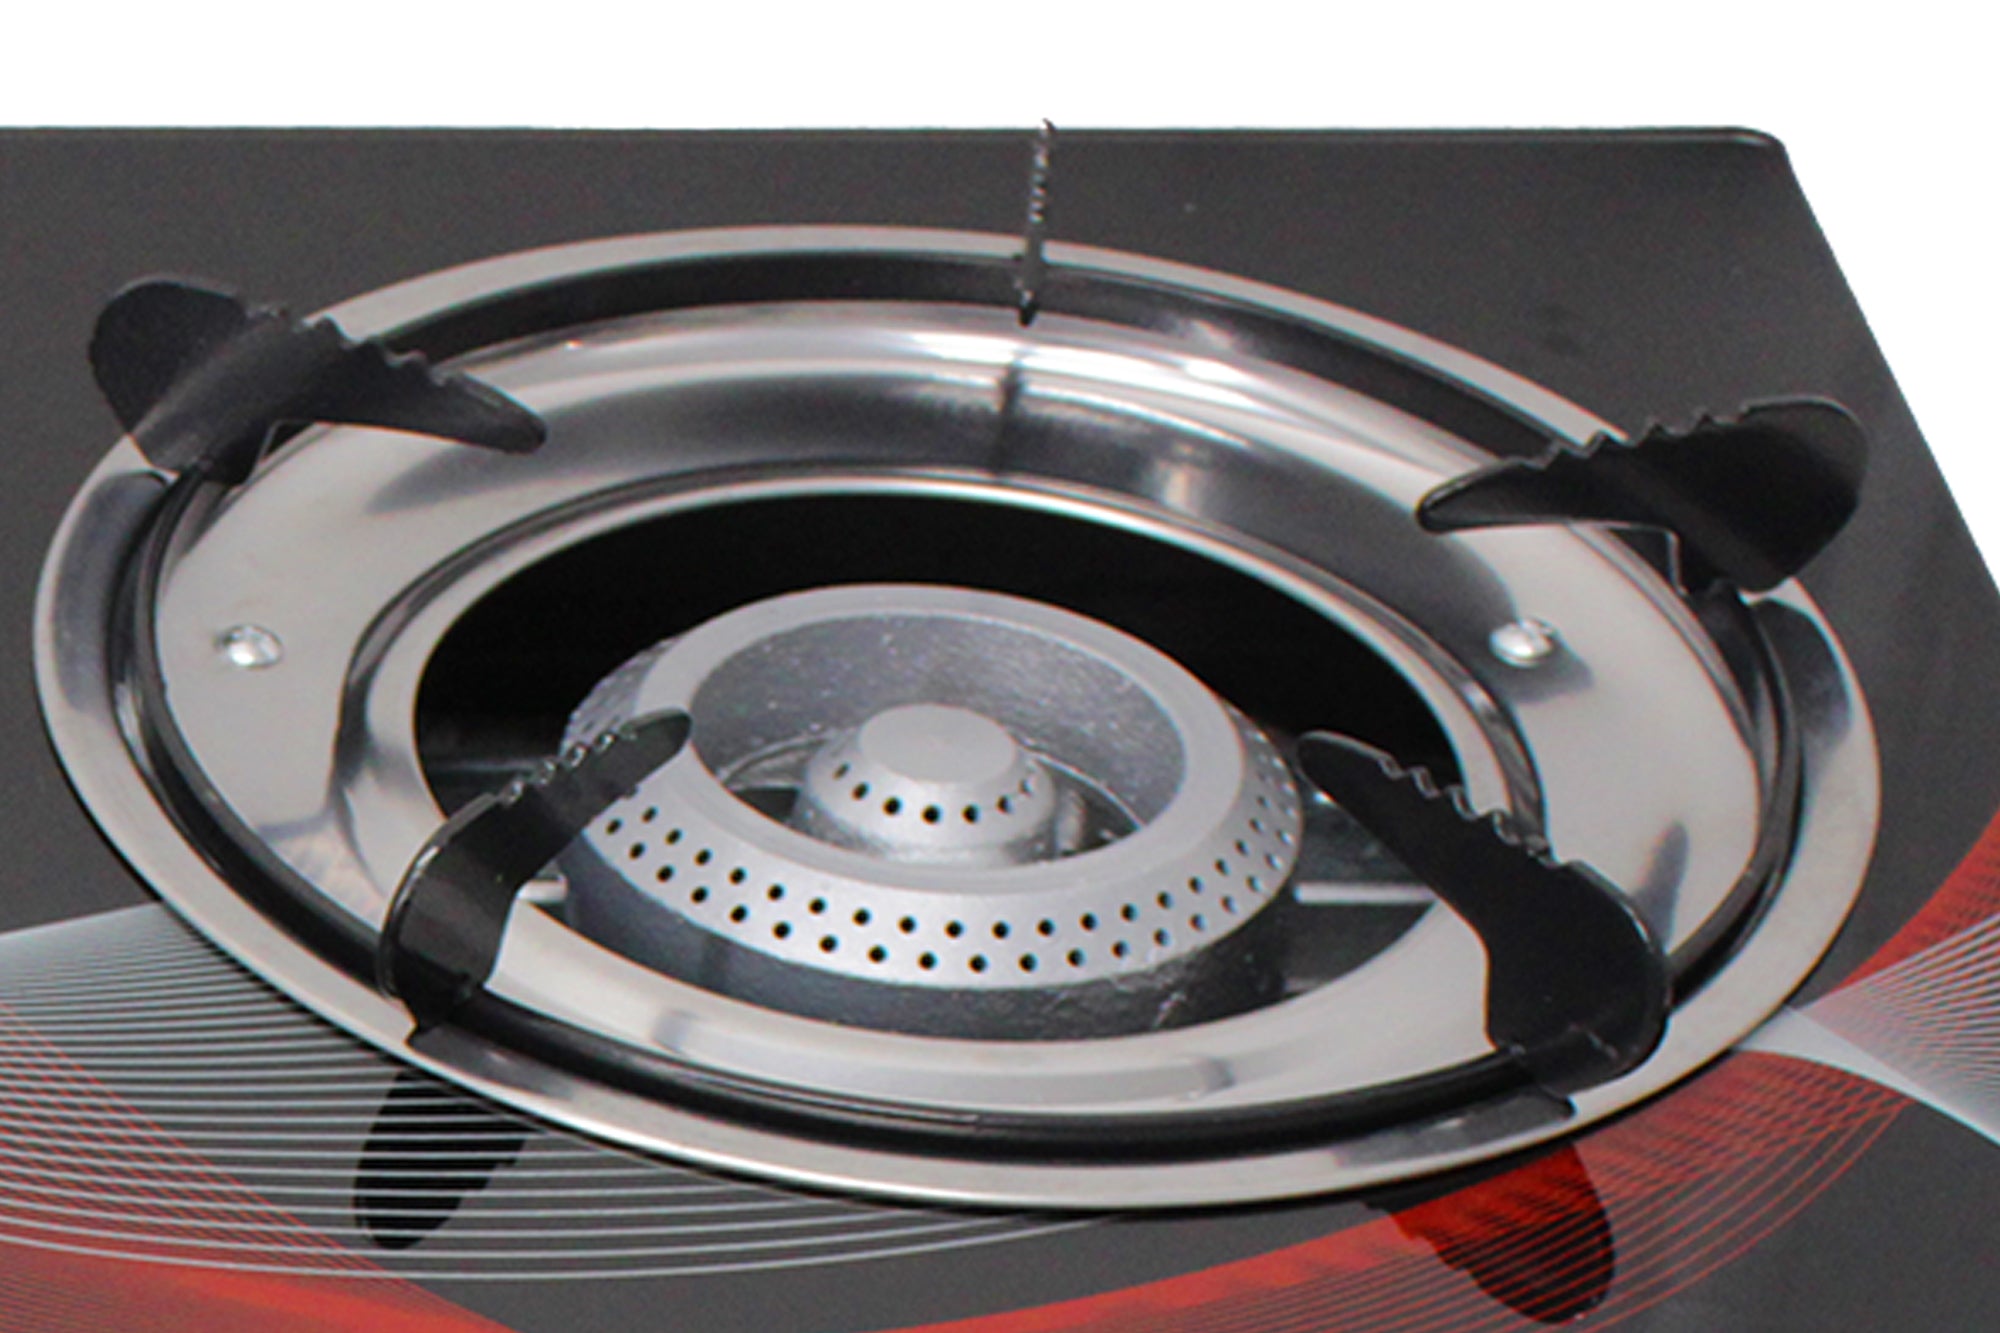 Dual Stand Auto-Ignition Tempered Glass & Grey Burner Gas Stove - Red Swirl